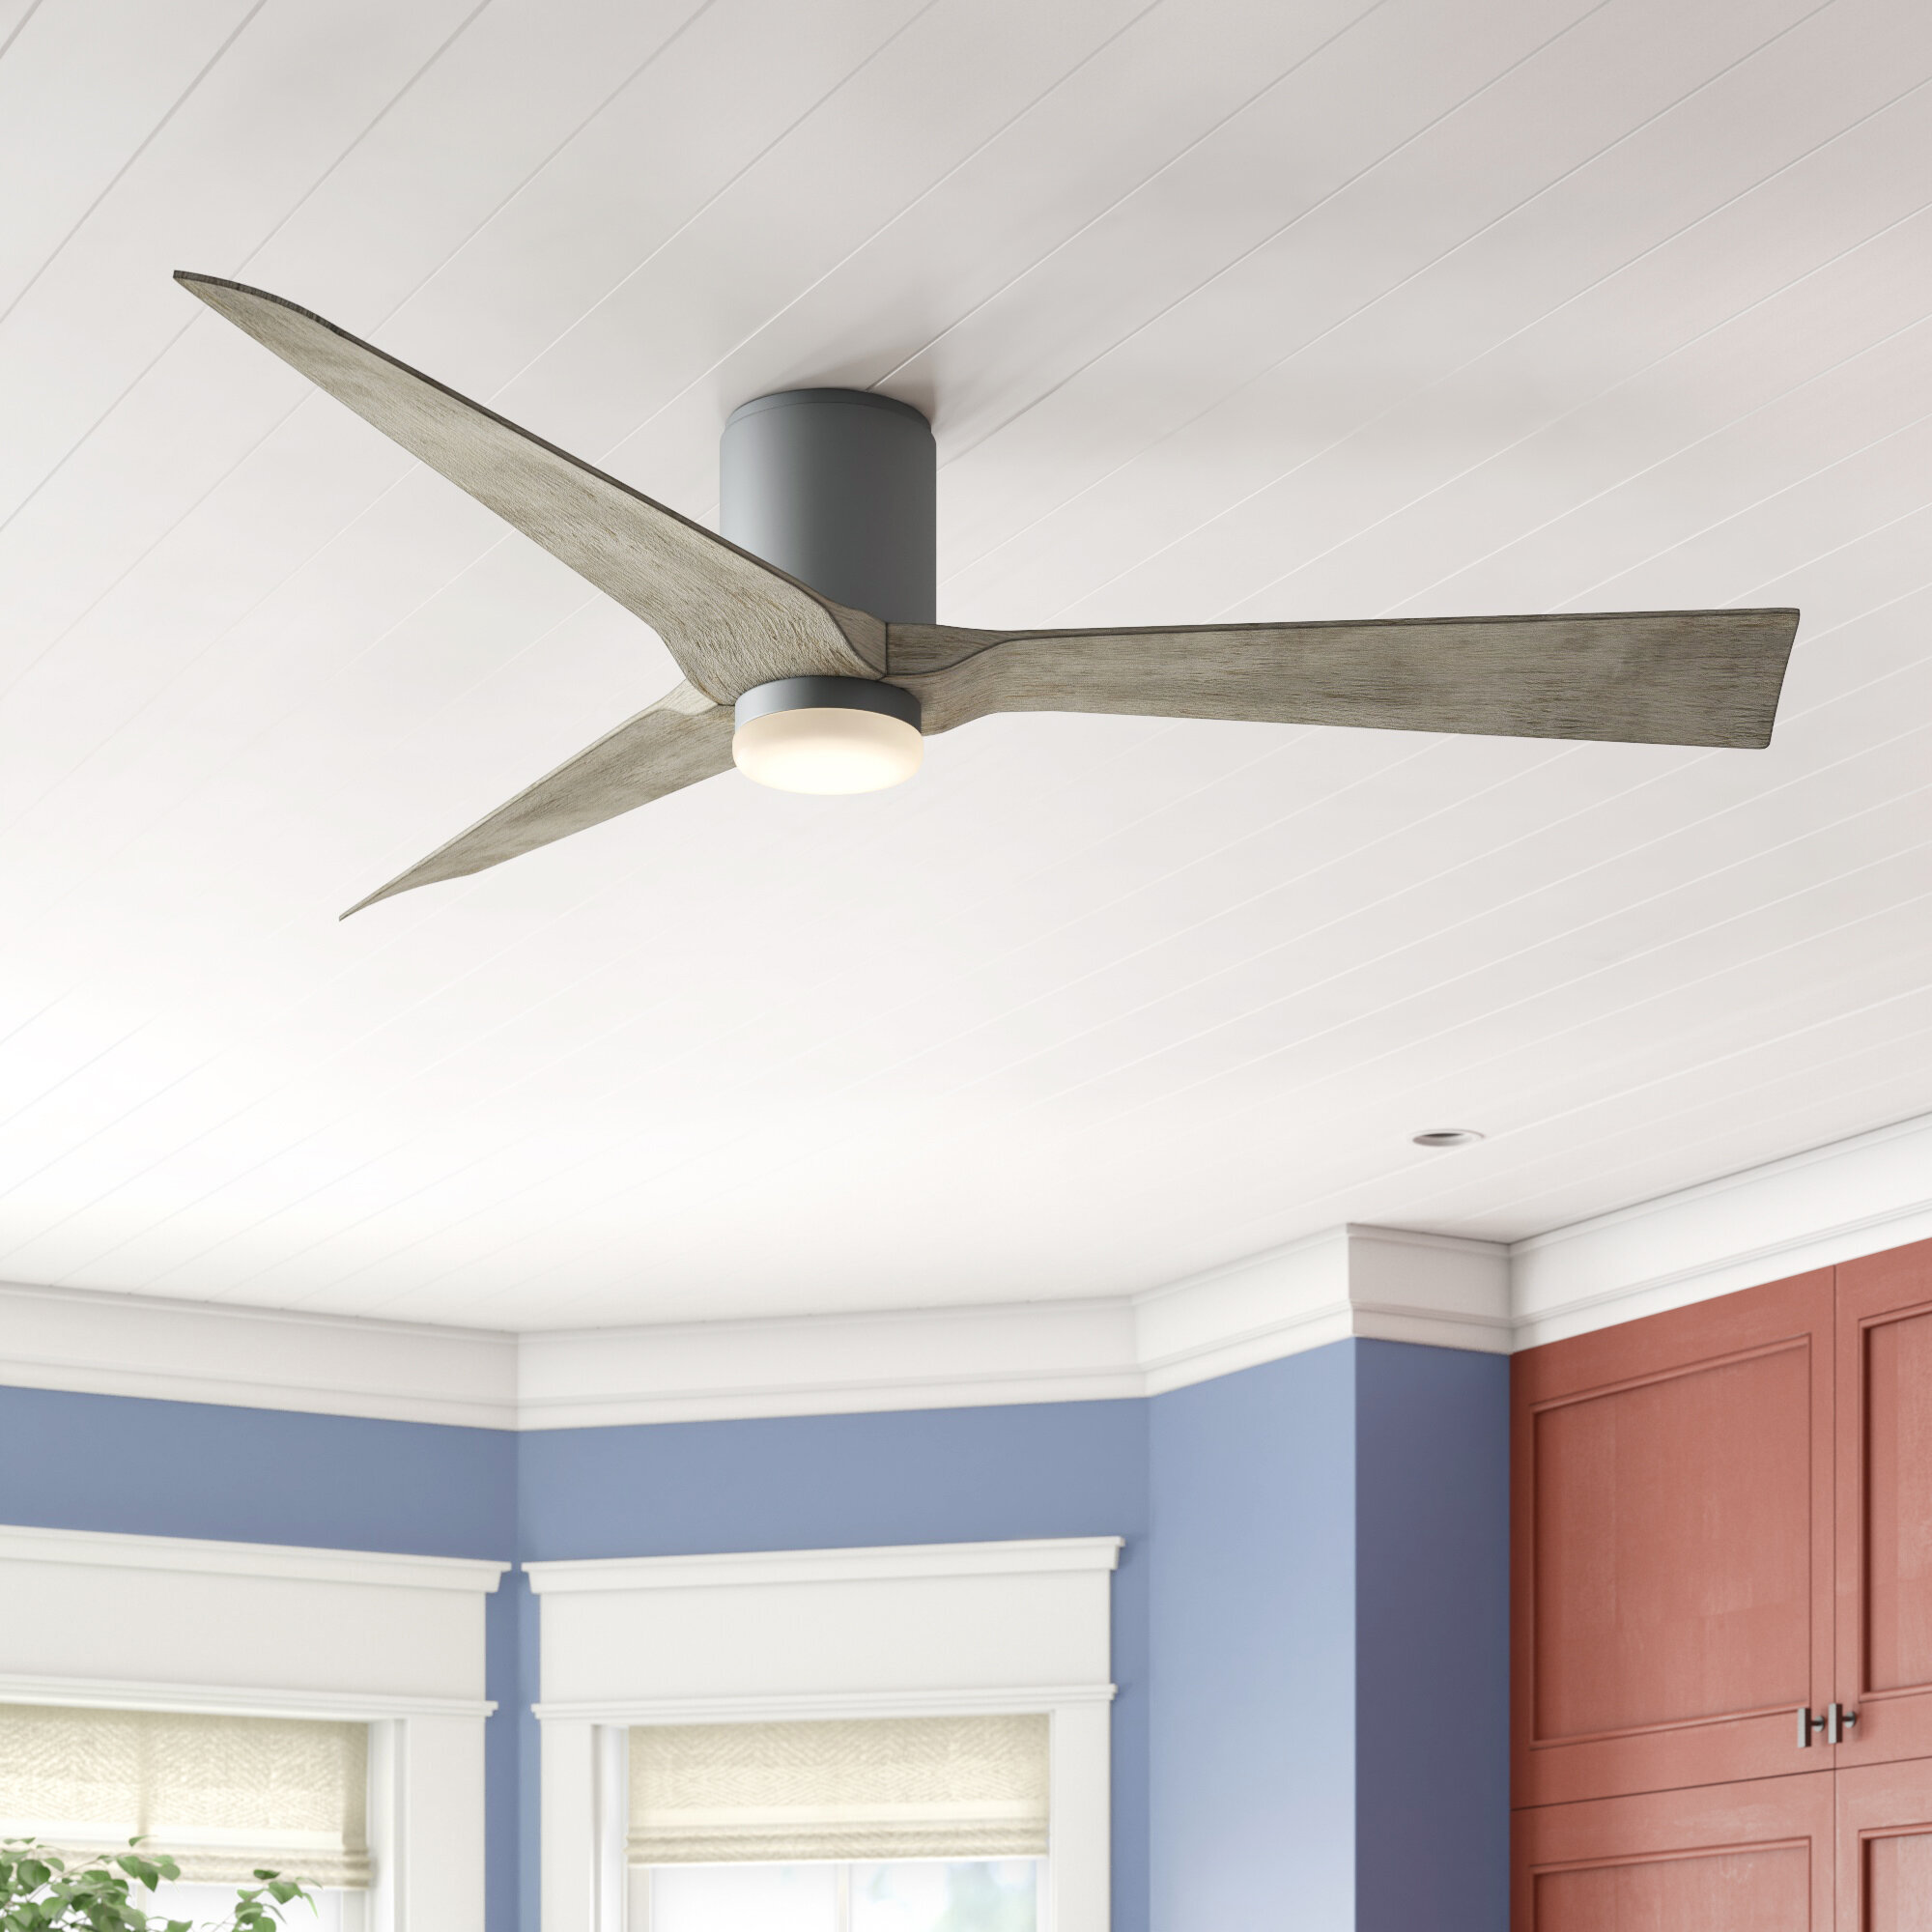 Modern Forms 54 Aviator 3 Blade Outdoor Smart Flush Mount Ceiling Fan With Wall Control And Light Kit Included Reviews Wayfair